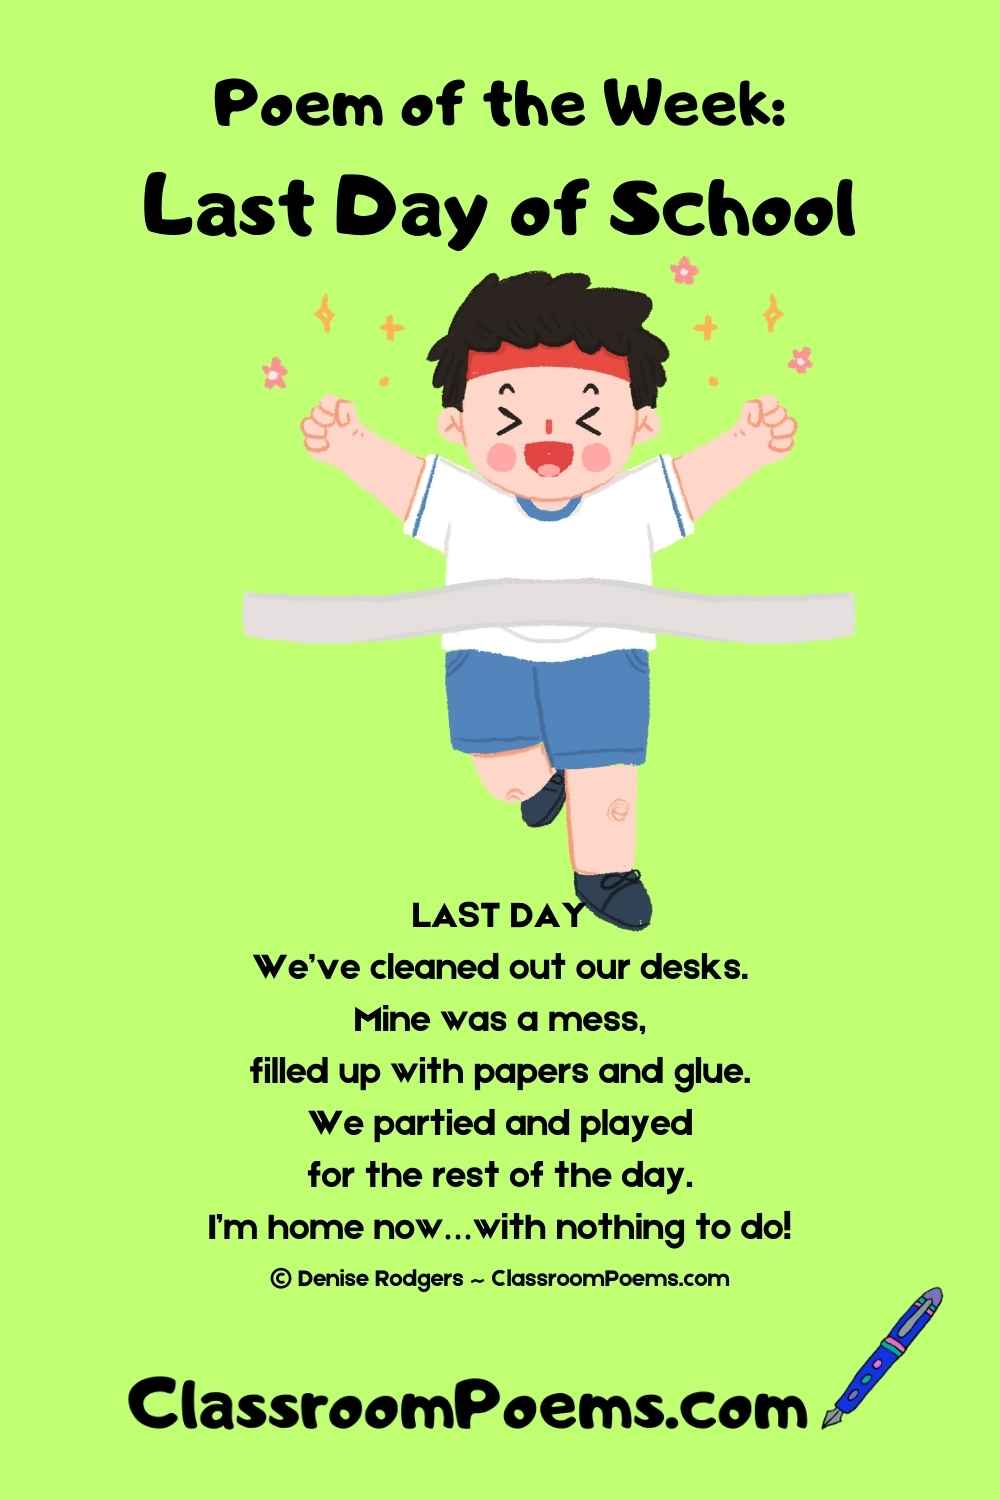 Last Day of School poem by Denise Rodgers on ClassroomPoems.com.